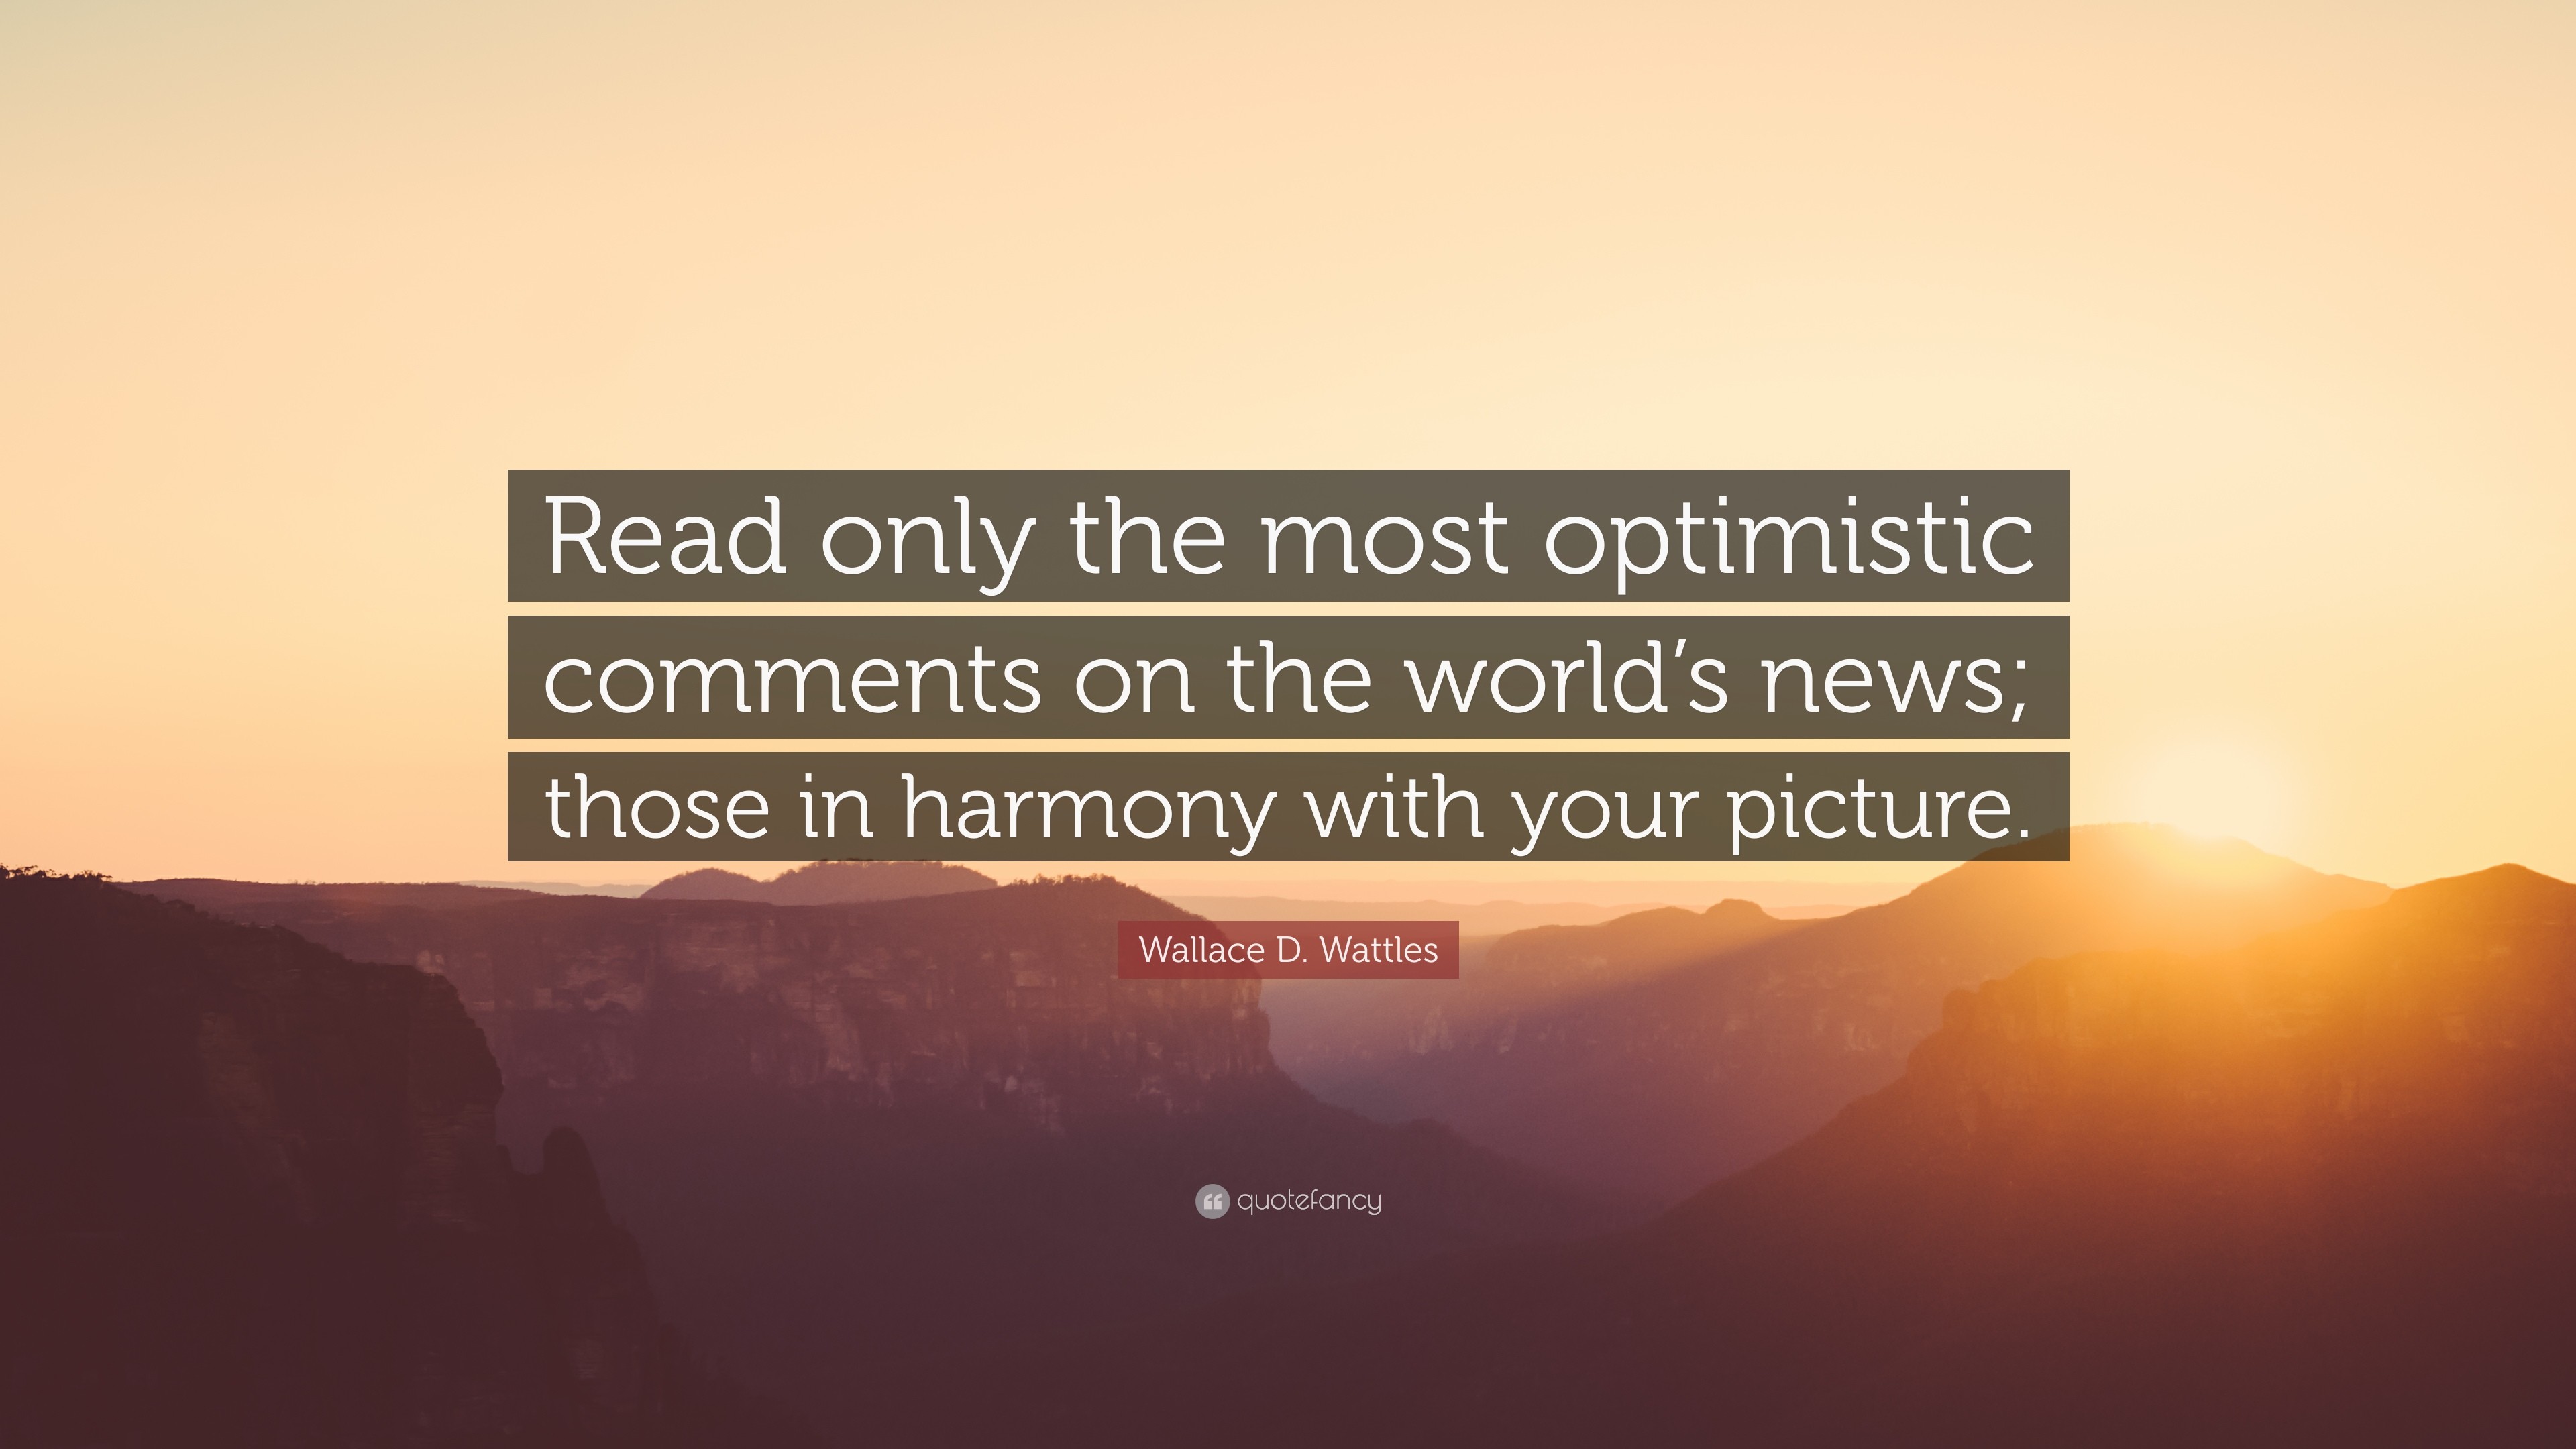 3840x2160 Wallace D. Wattles Quote: “Read only the most optimistic comments on the  world's